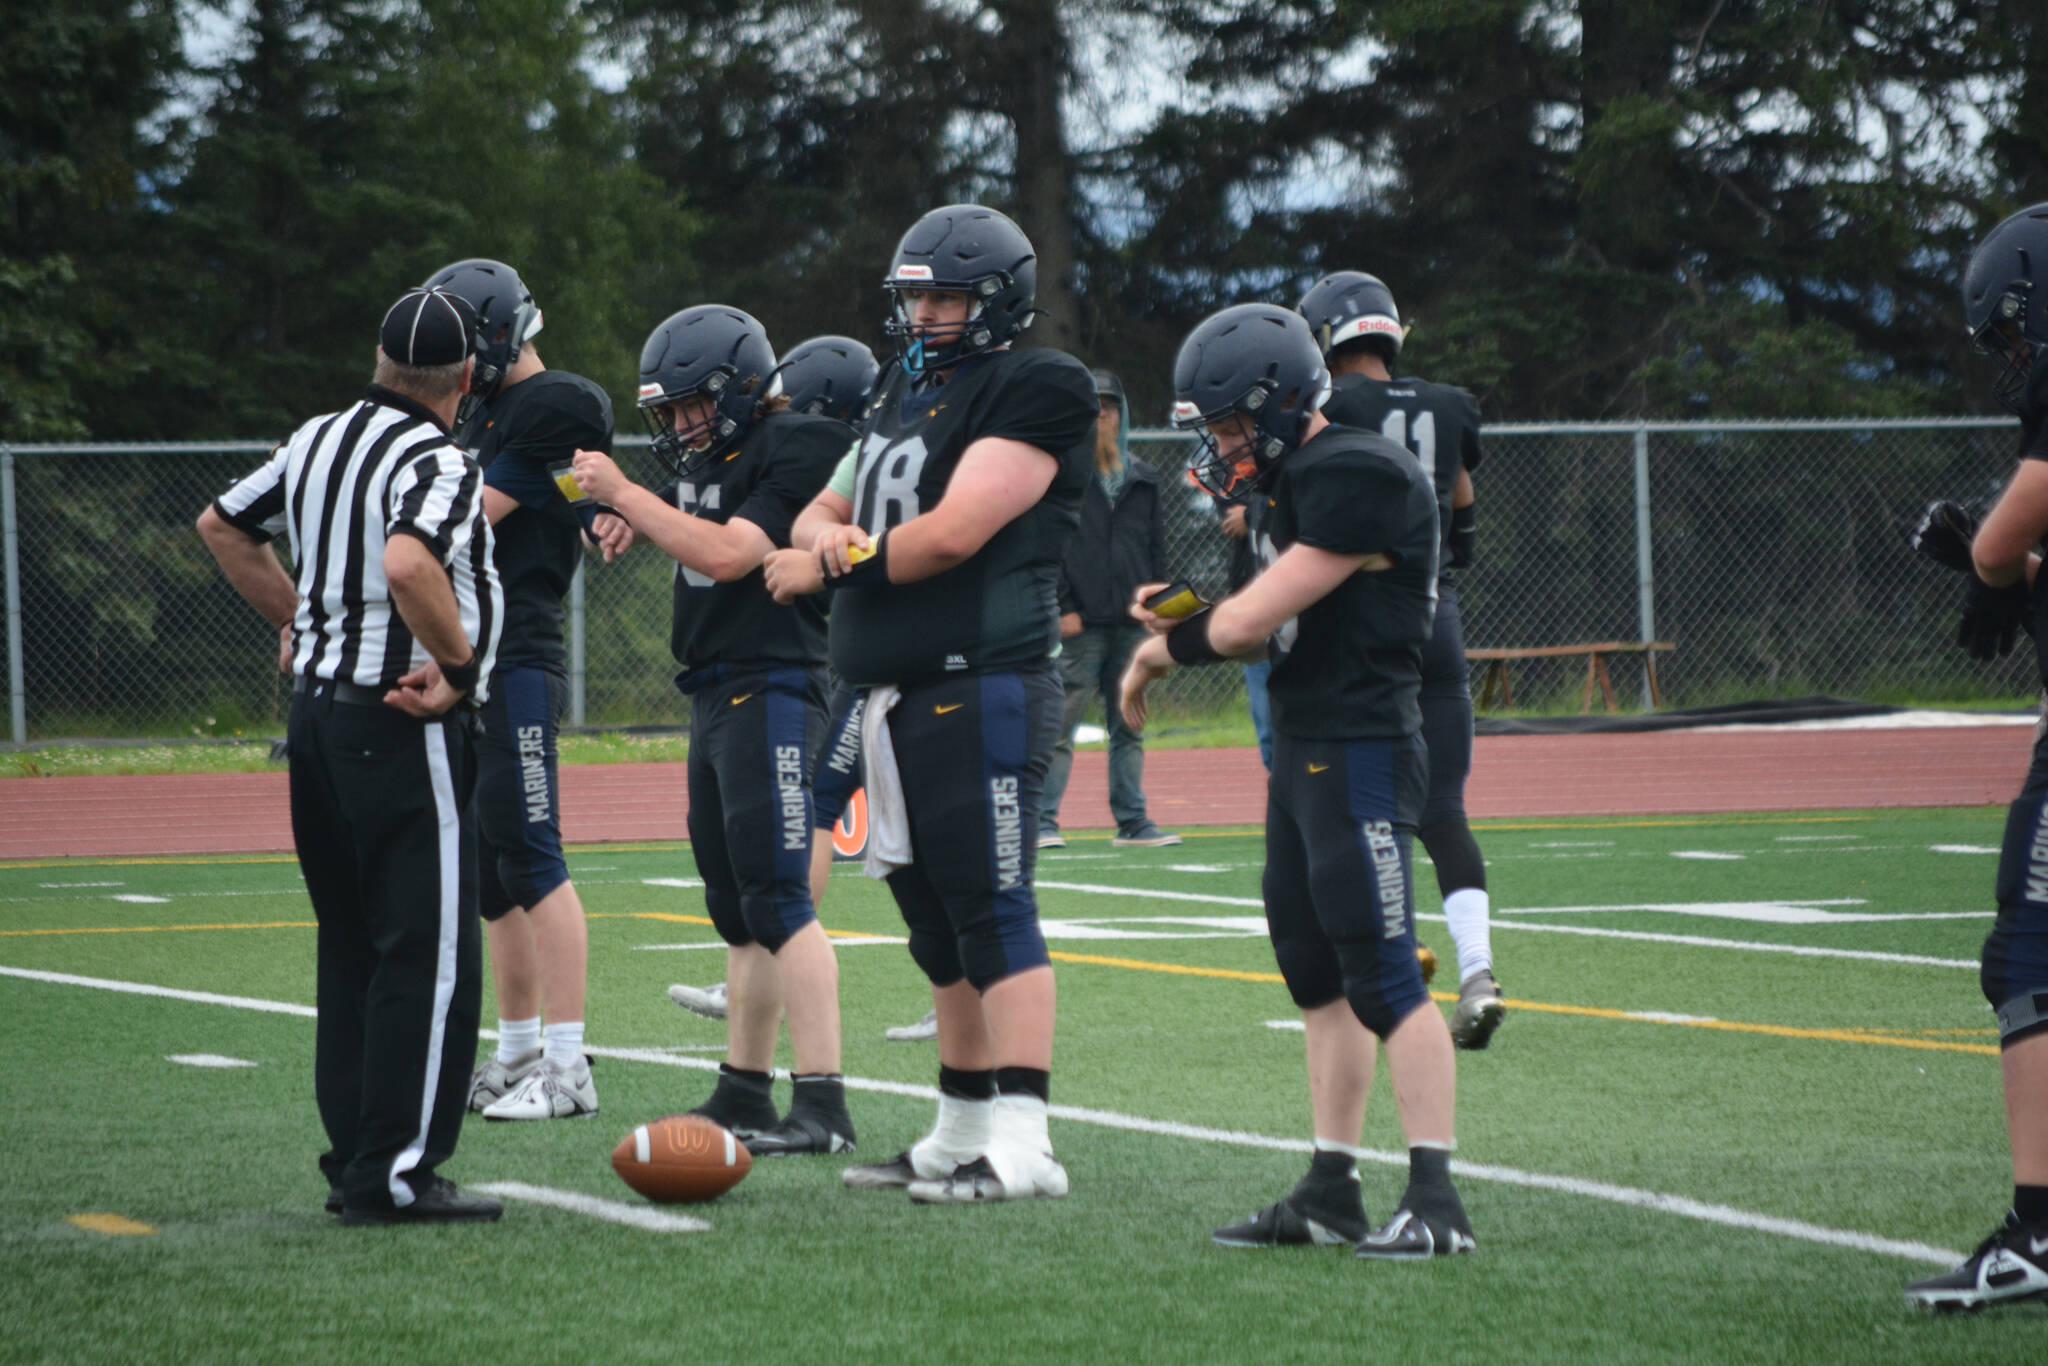 The Mariner’s offensive line coordinates their attack on Saturday, Aug. 13, 2022, at Homer High School in Homer, Alaska. (Photo by Charlie Menke/ Homer News)